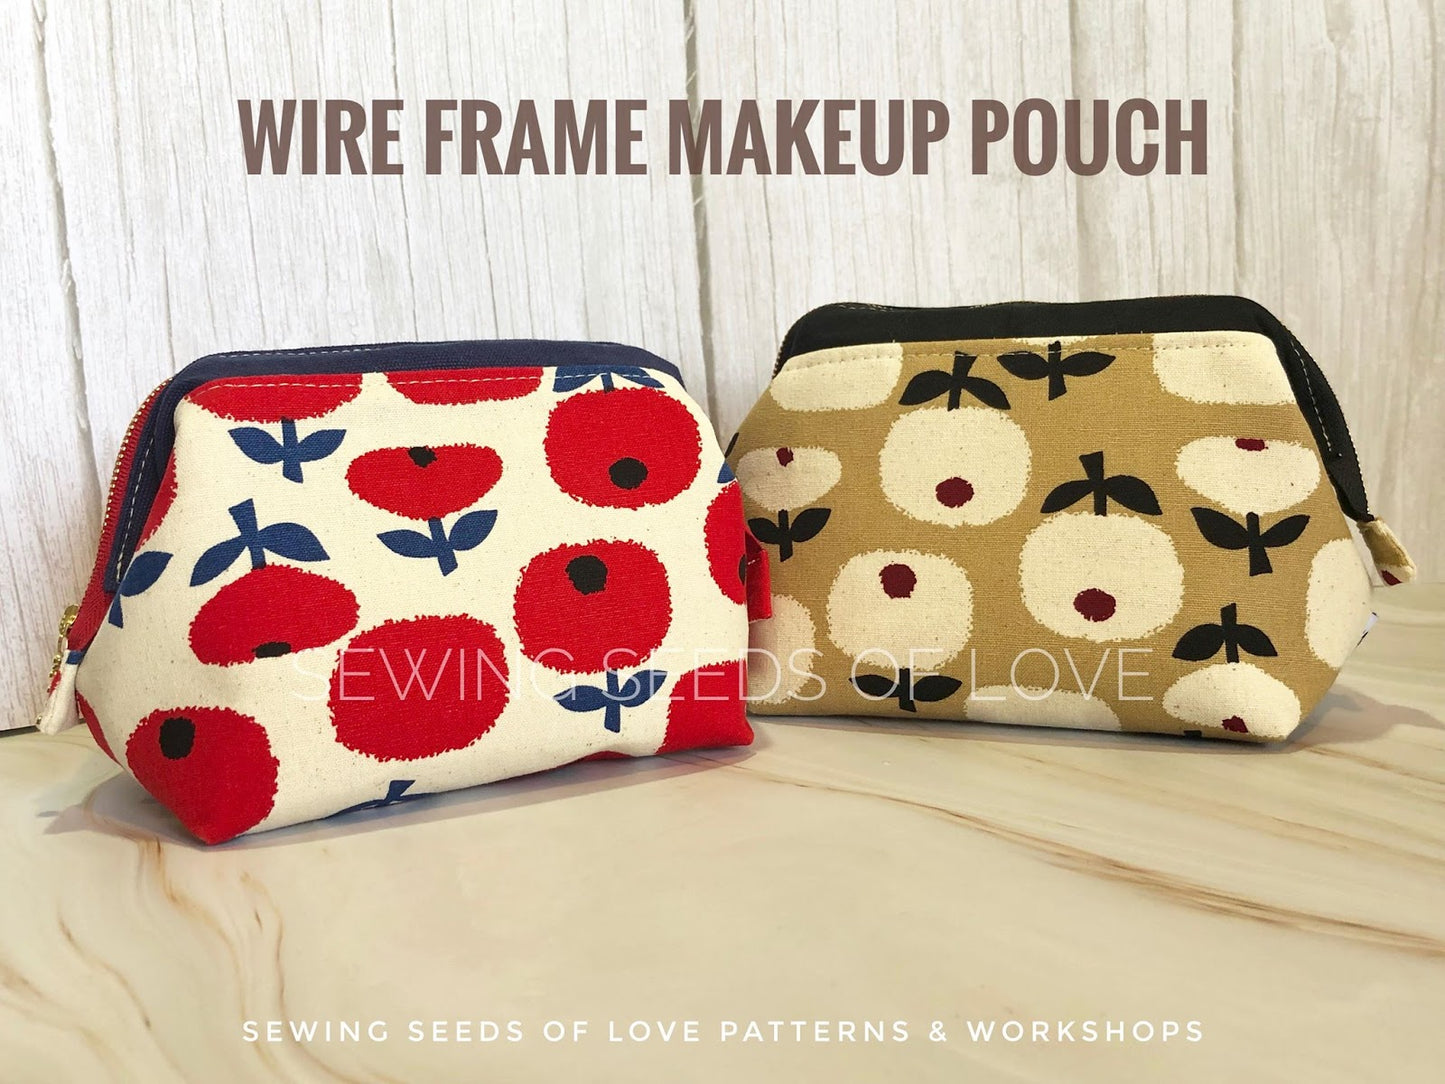 Seedlings 102 - Wire Frame Makeup Pouch Workshop